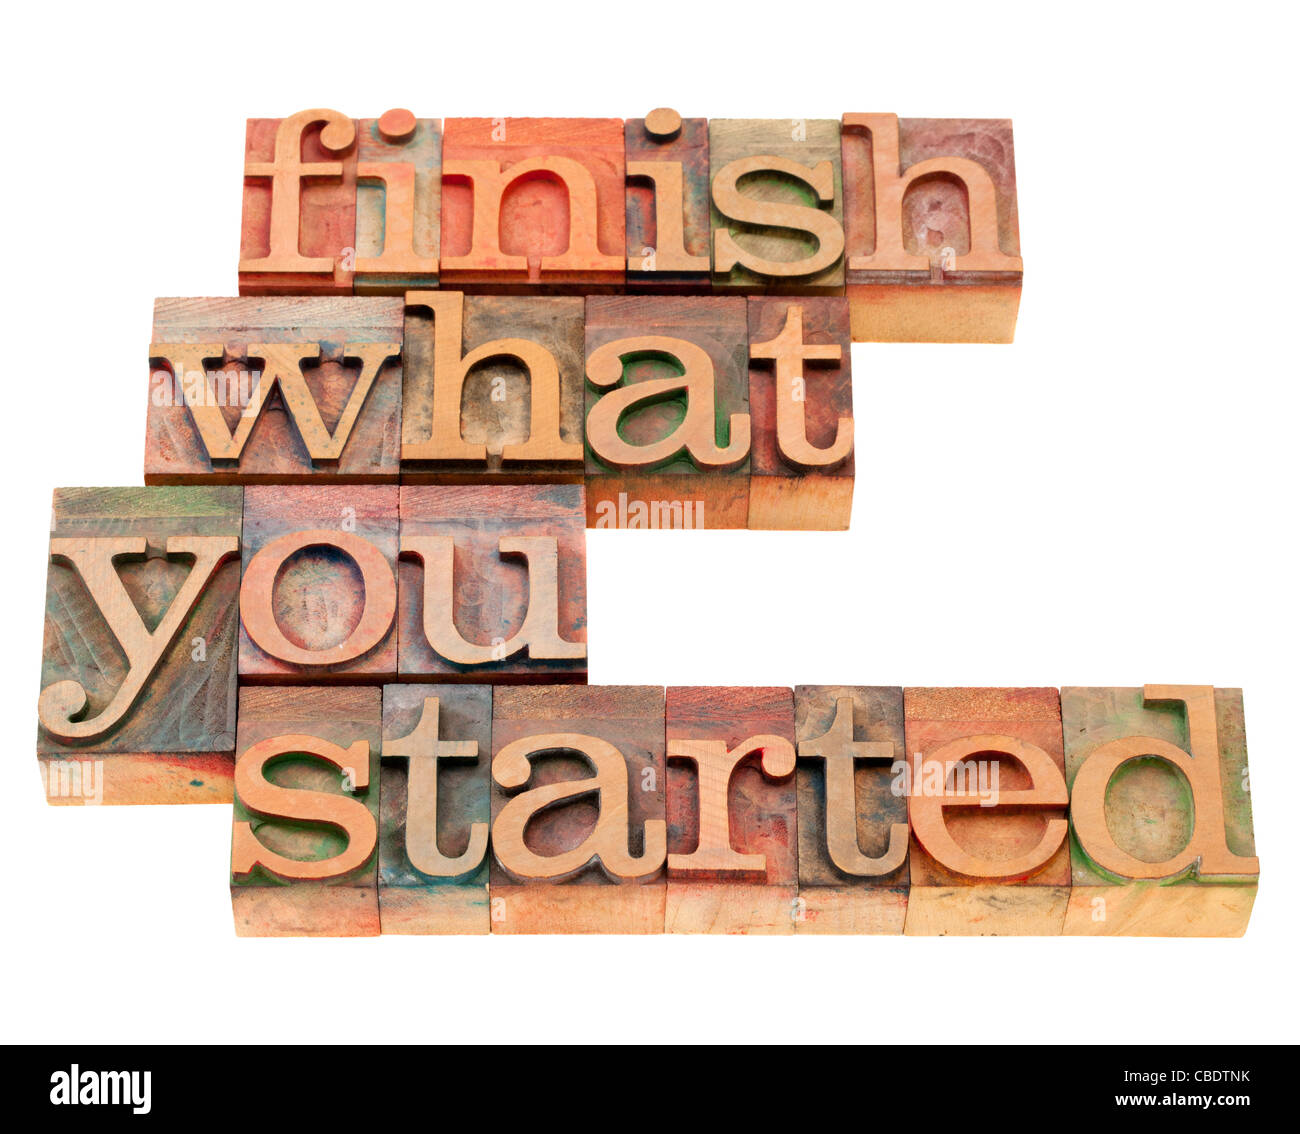 finish what you started - motivational slogan in vintage wood letterpress printing blocks, isolated on white Stock Photo